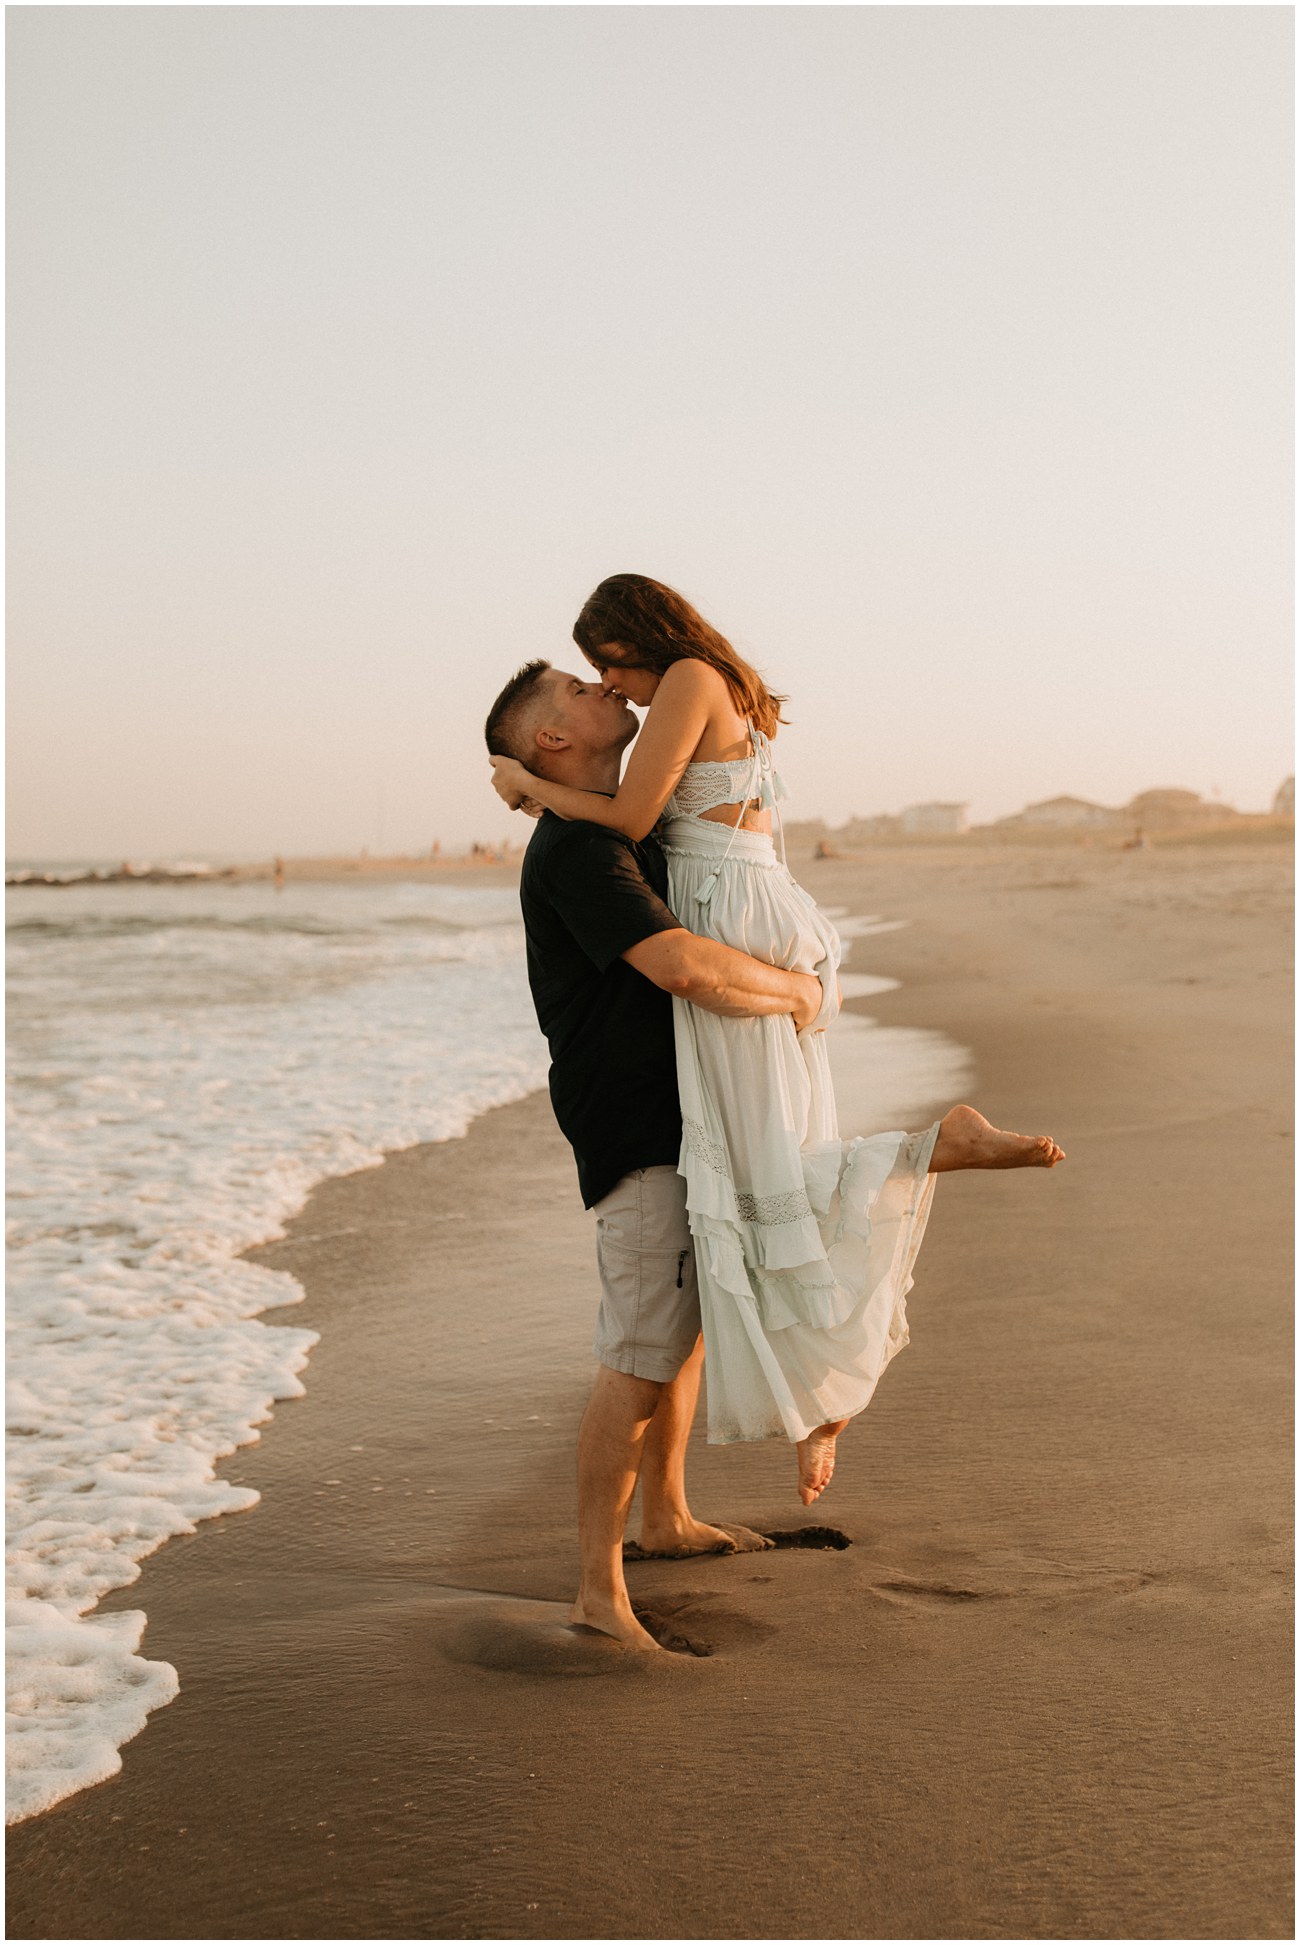 Man lifts woman for a kiss on the beach